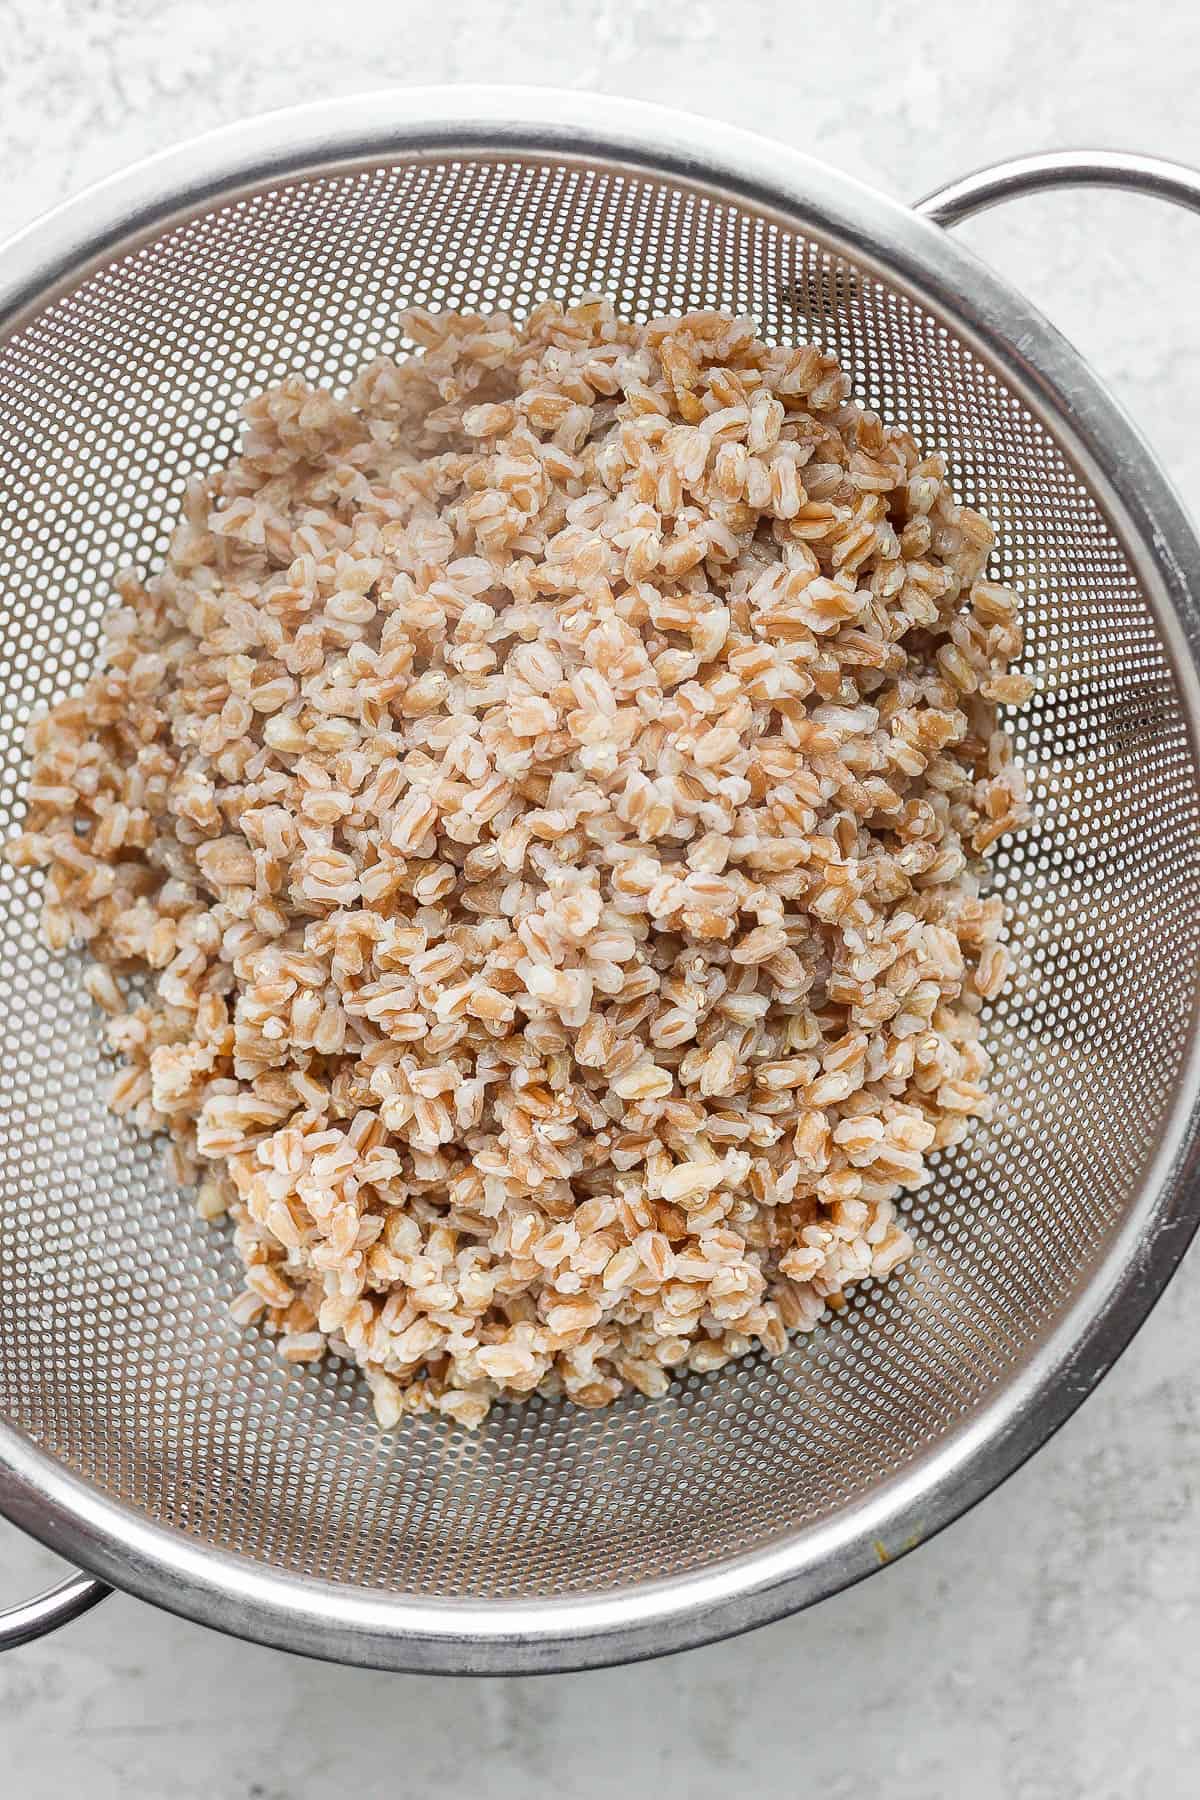 Cooked farro draining in a colander.